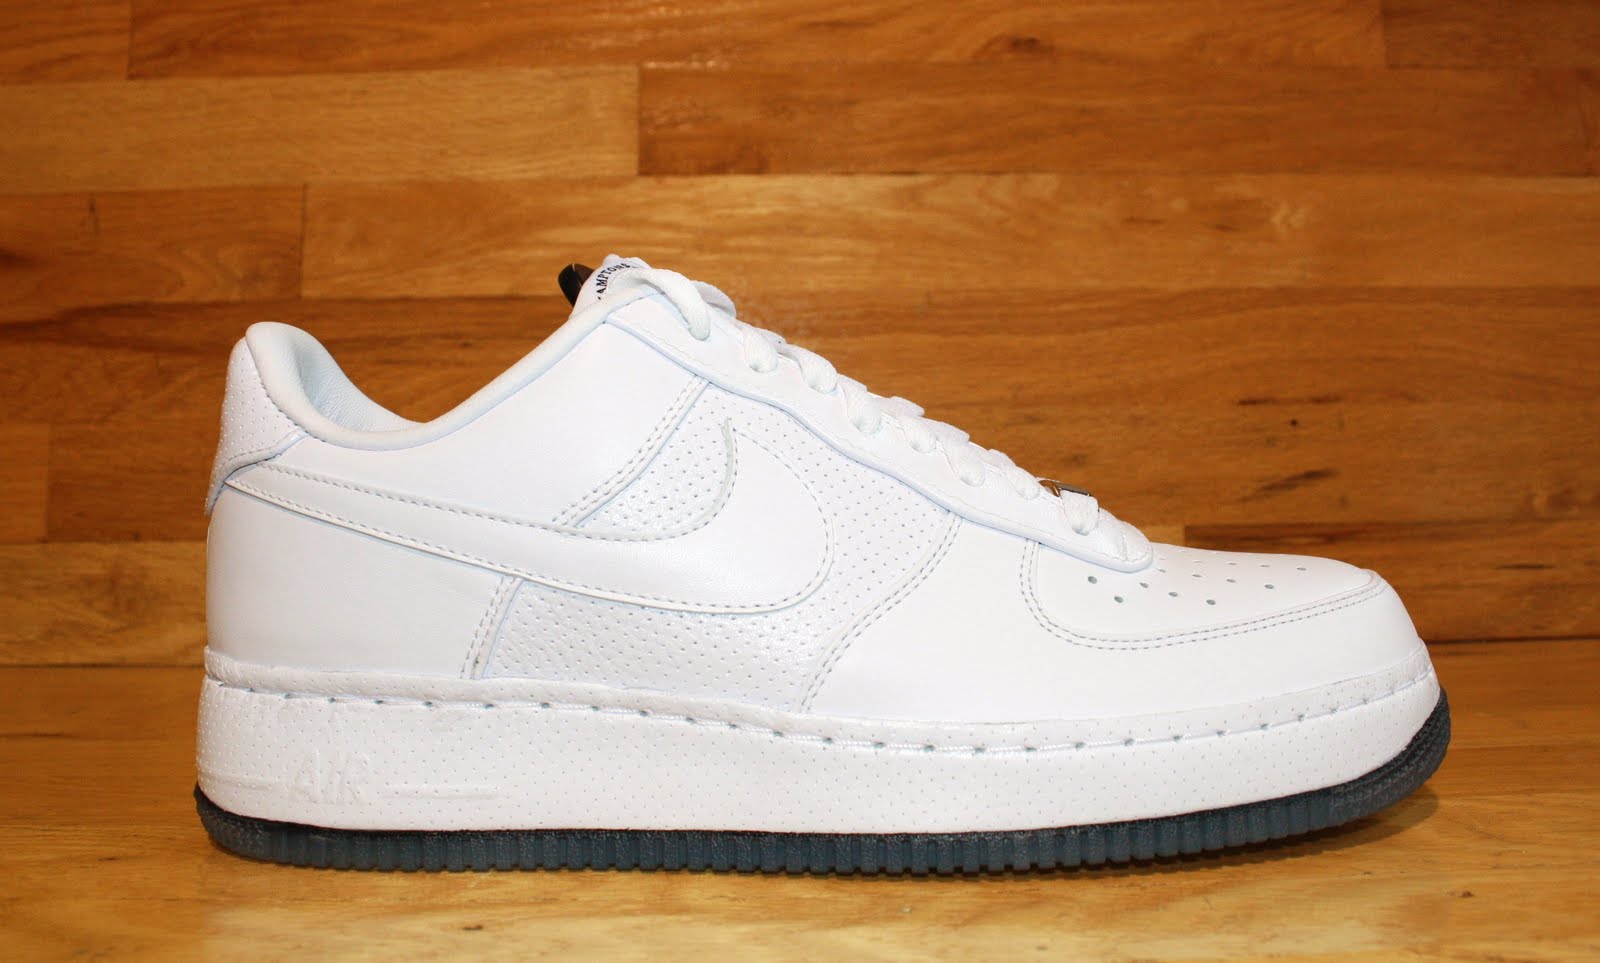 Dr. Jays Stores: New Nike Air Force One 